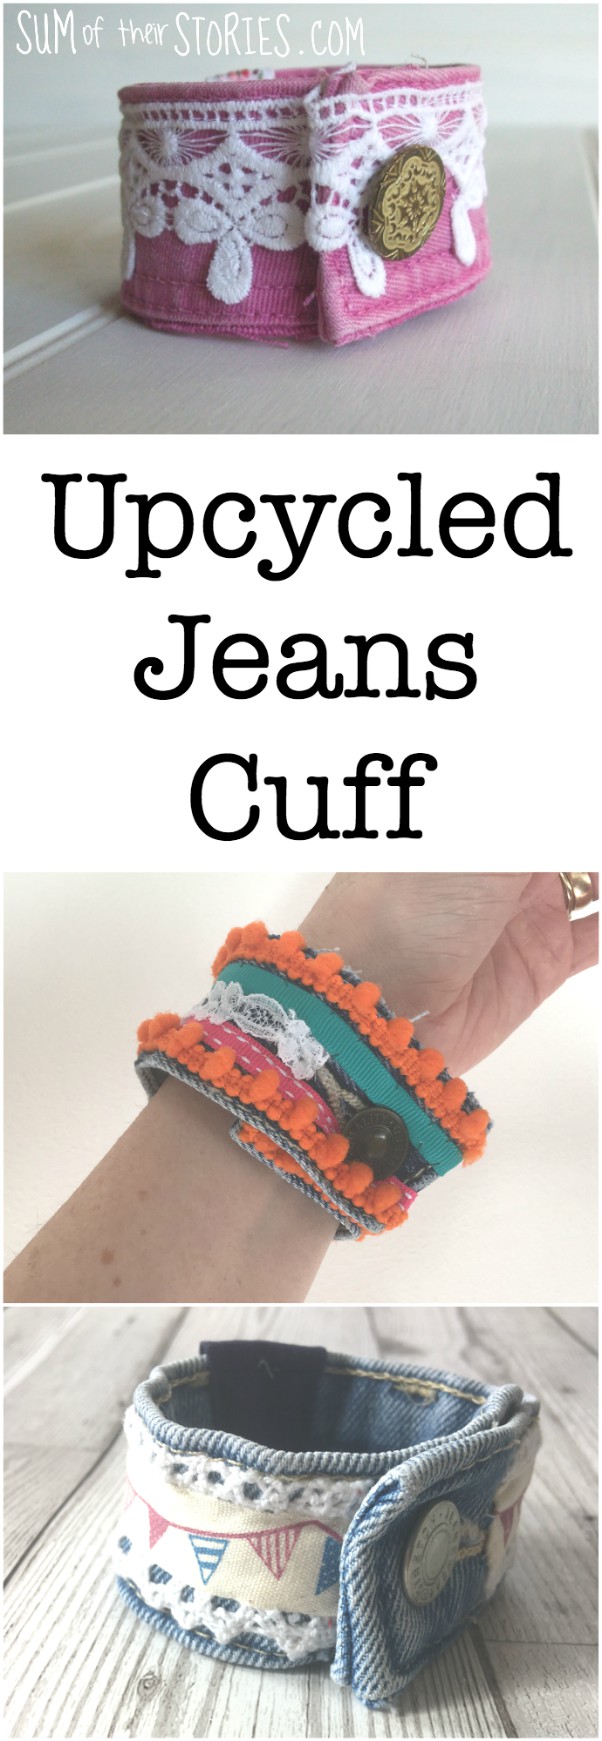 upcycled jeans cuff bracelet tutorial